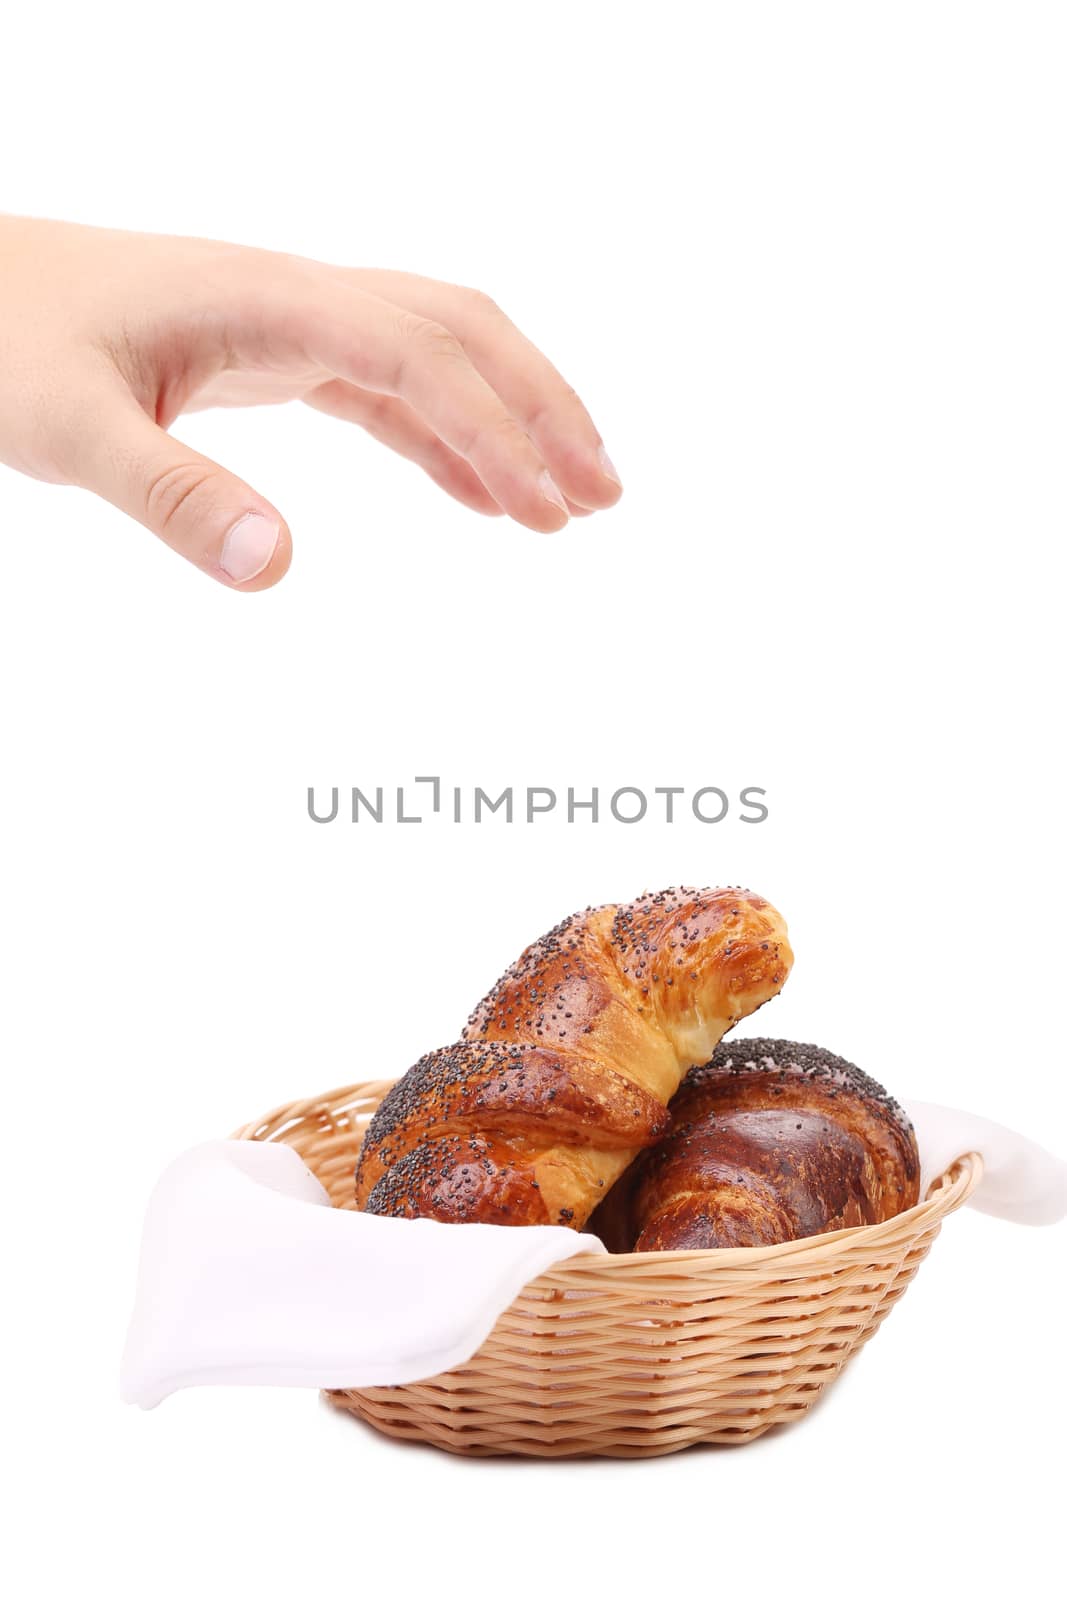 Hand above croissants in basket. by indigolotos